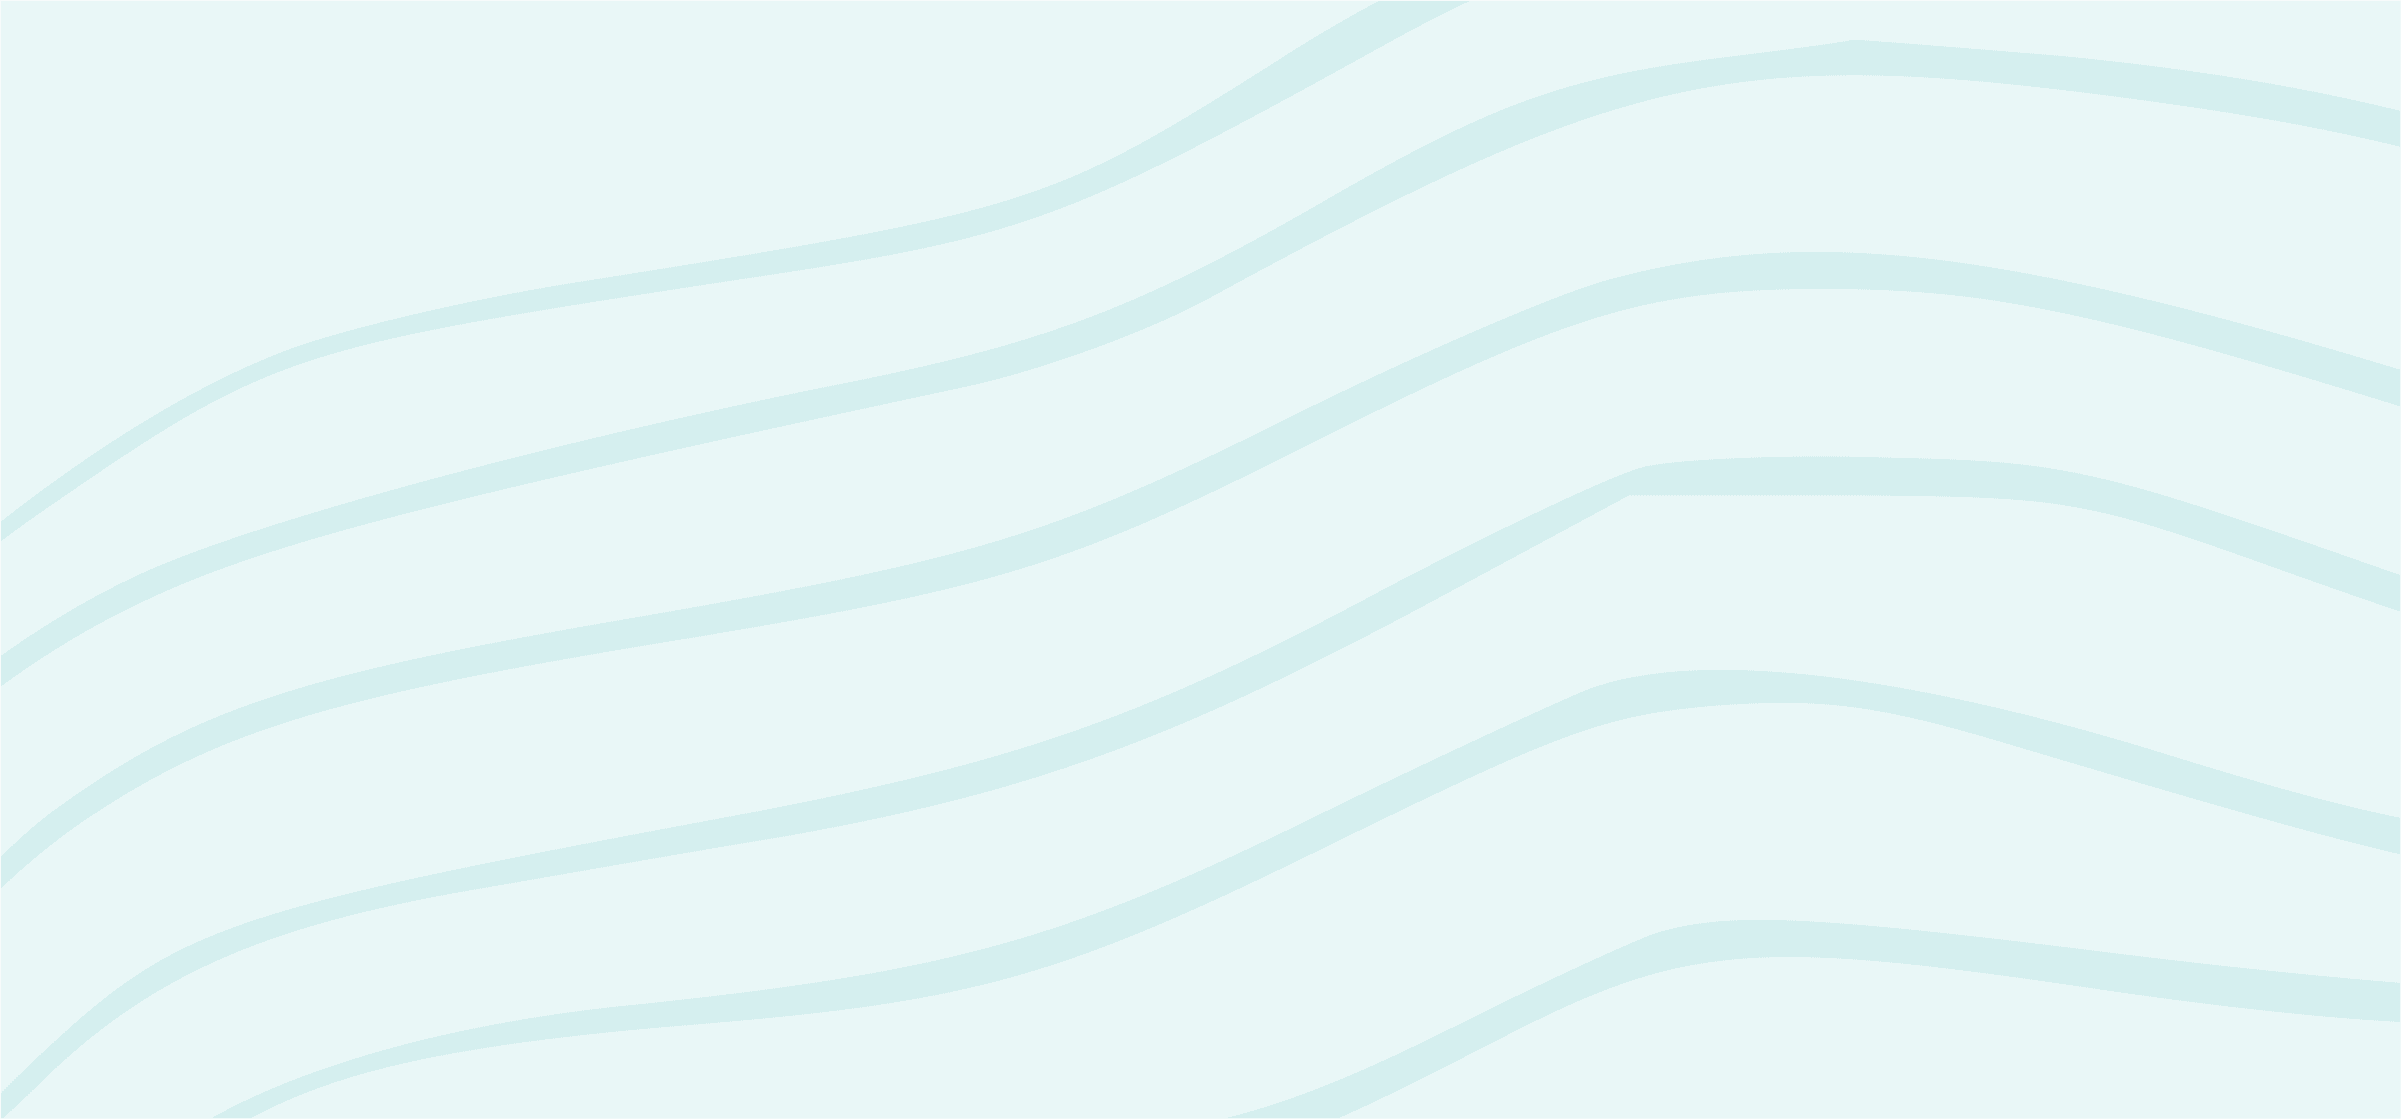 A series of smooth, wavy lines on a Unito green background.